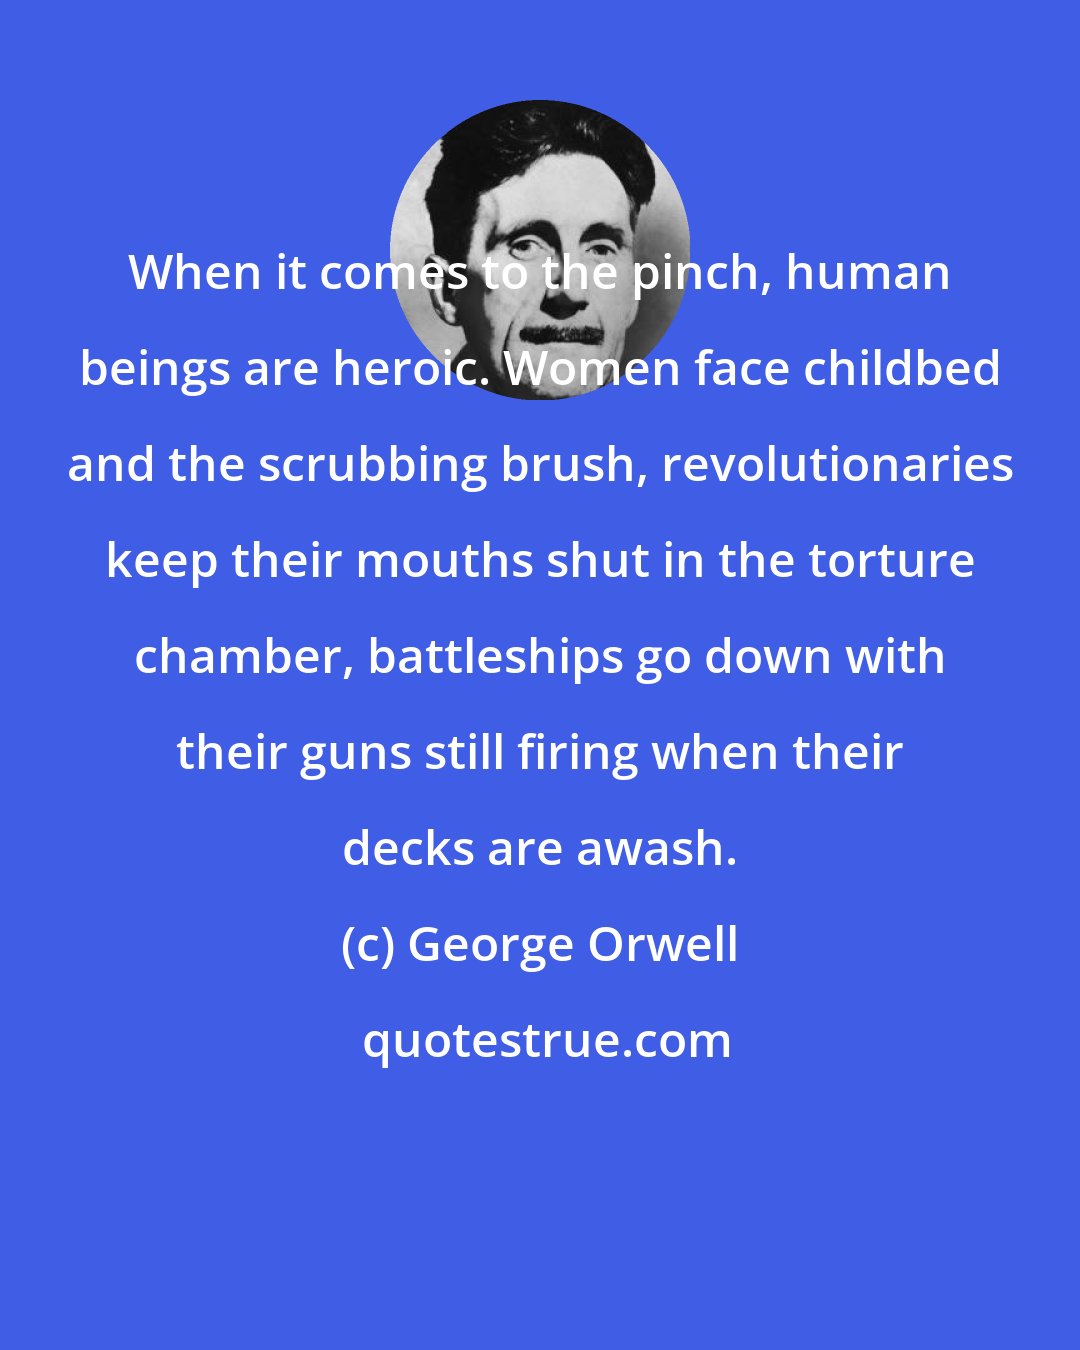 George Orwell: When it comes to the pinch, human beings are heroic. Women face childbed and the scrubbing brush, revolutionaries keep their mouths shut in the torture chamber, battleships go down with their guns still firing when their decks are awash.